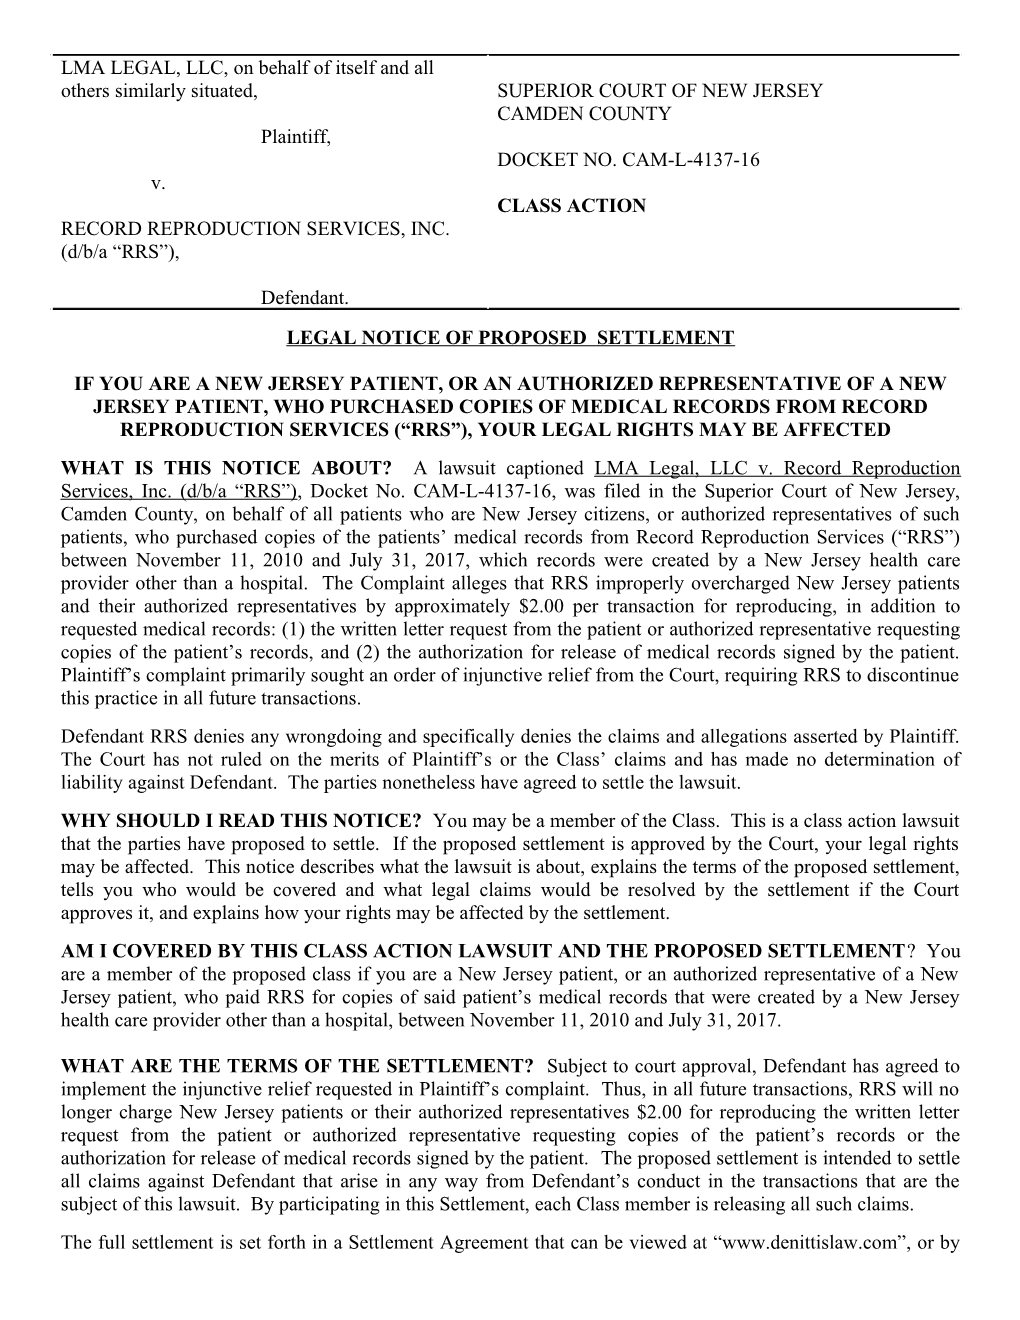 Legal Notice of Proposed Settlement